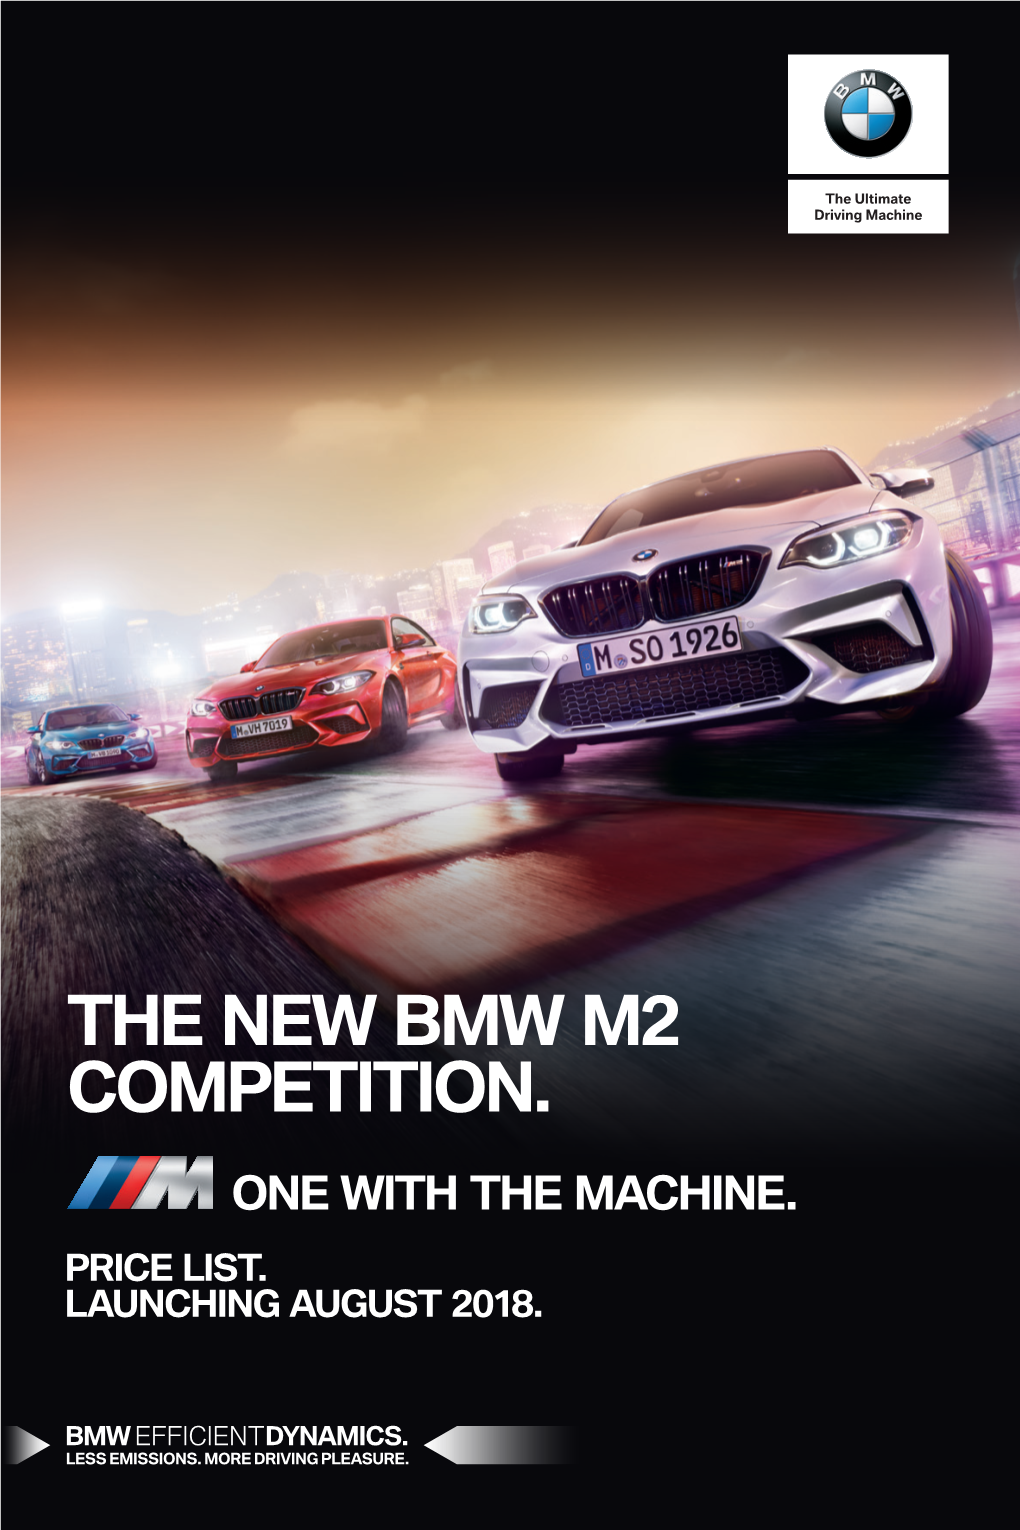 The New Bmw M2 Competition. One with the Machine